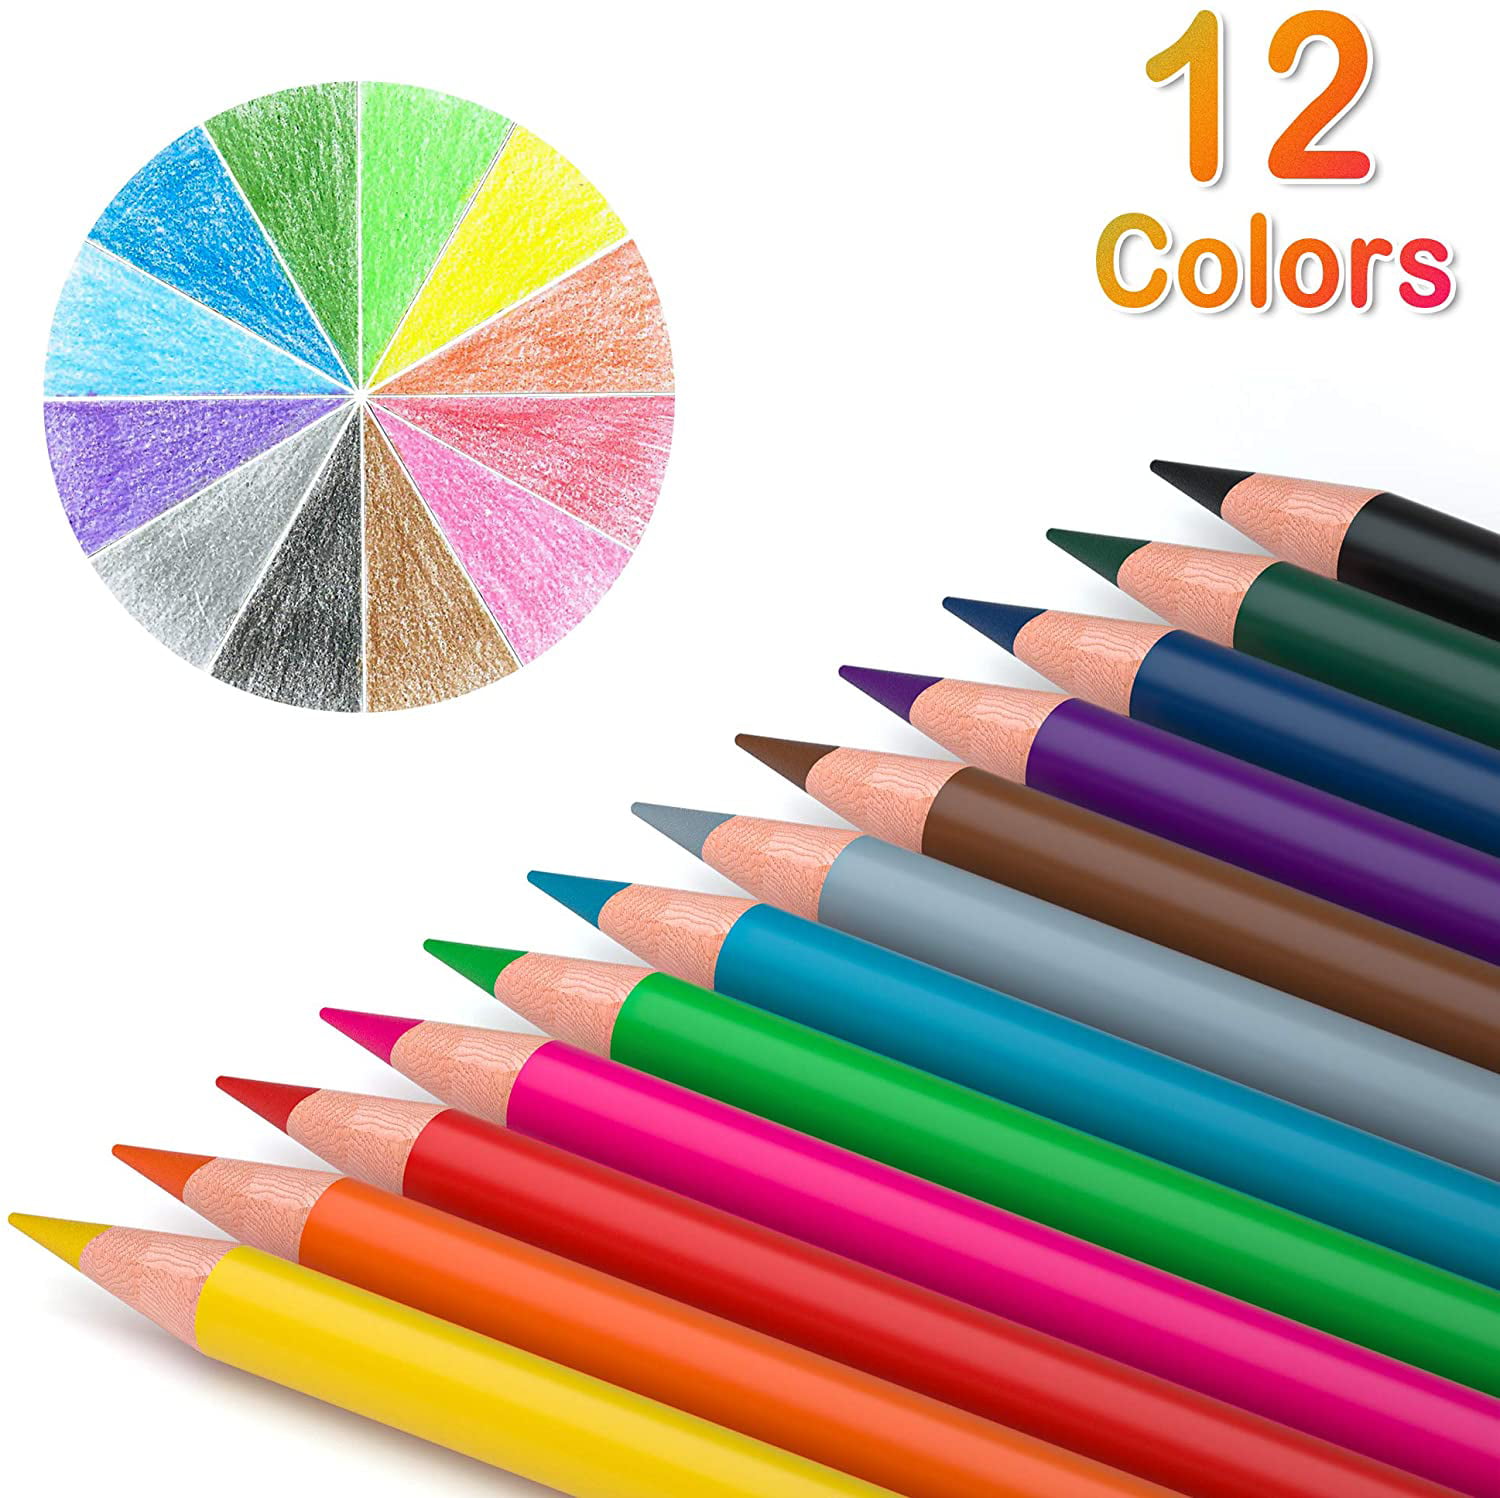 Crayola The Big Sharpened Colored Pencil 100-pack • Price »